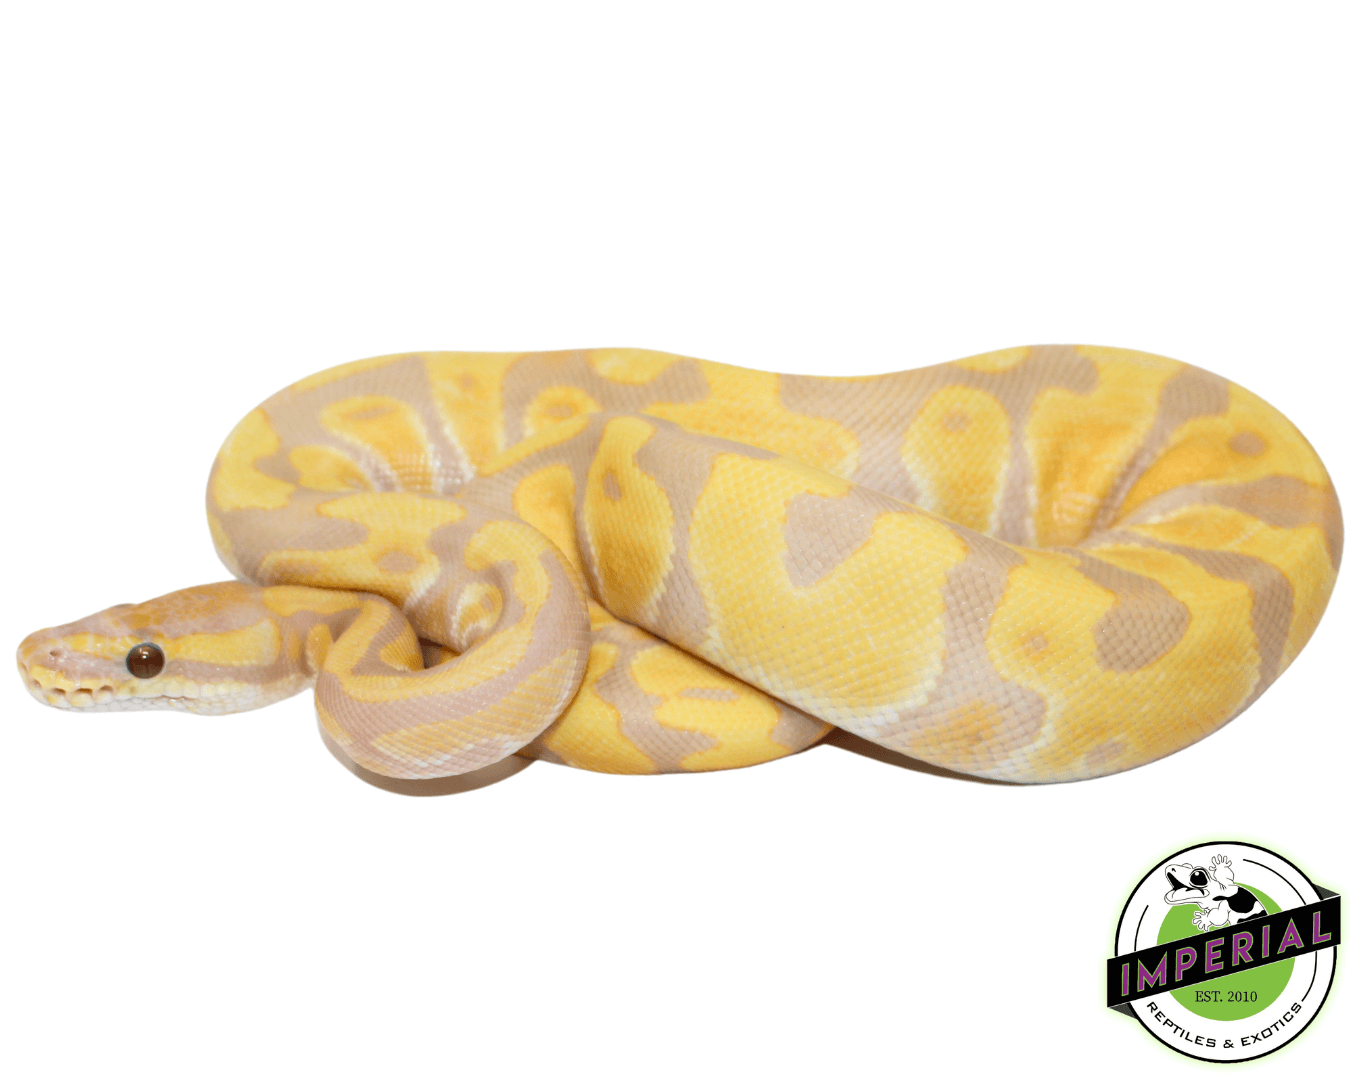 leopard enchi candy ball python for sale online, buy cheap ball pythons near me